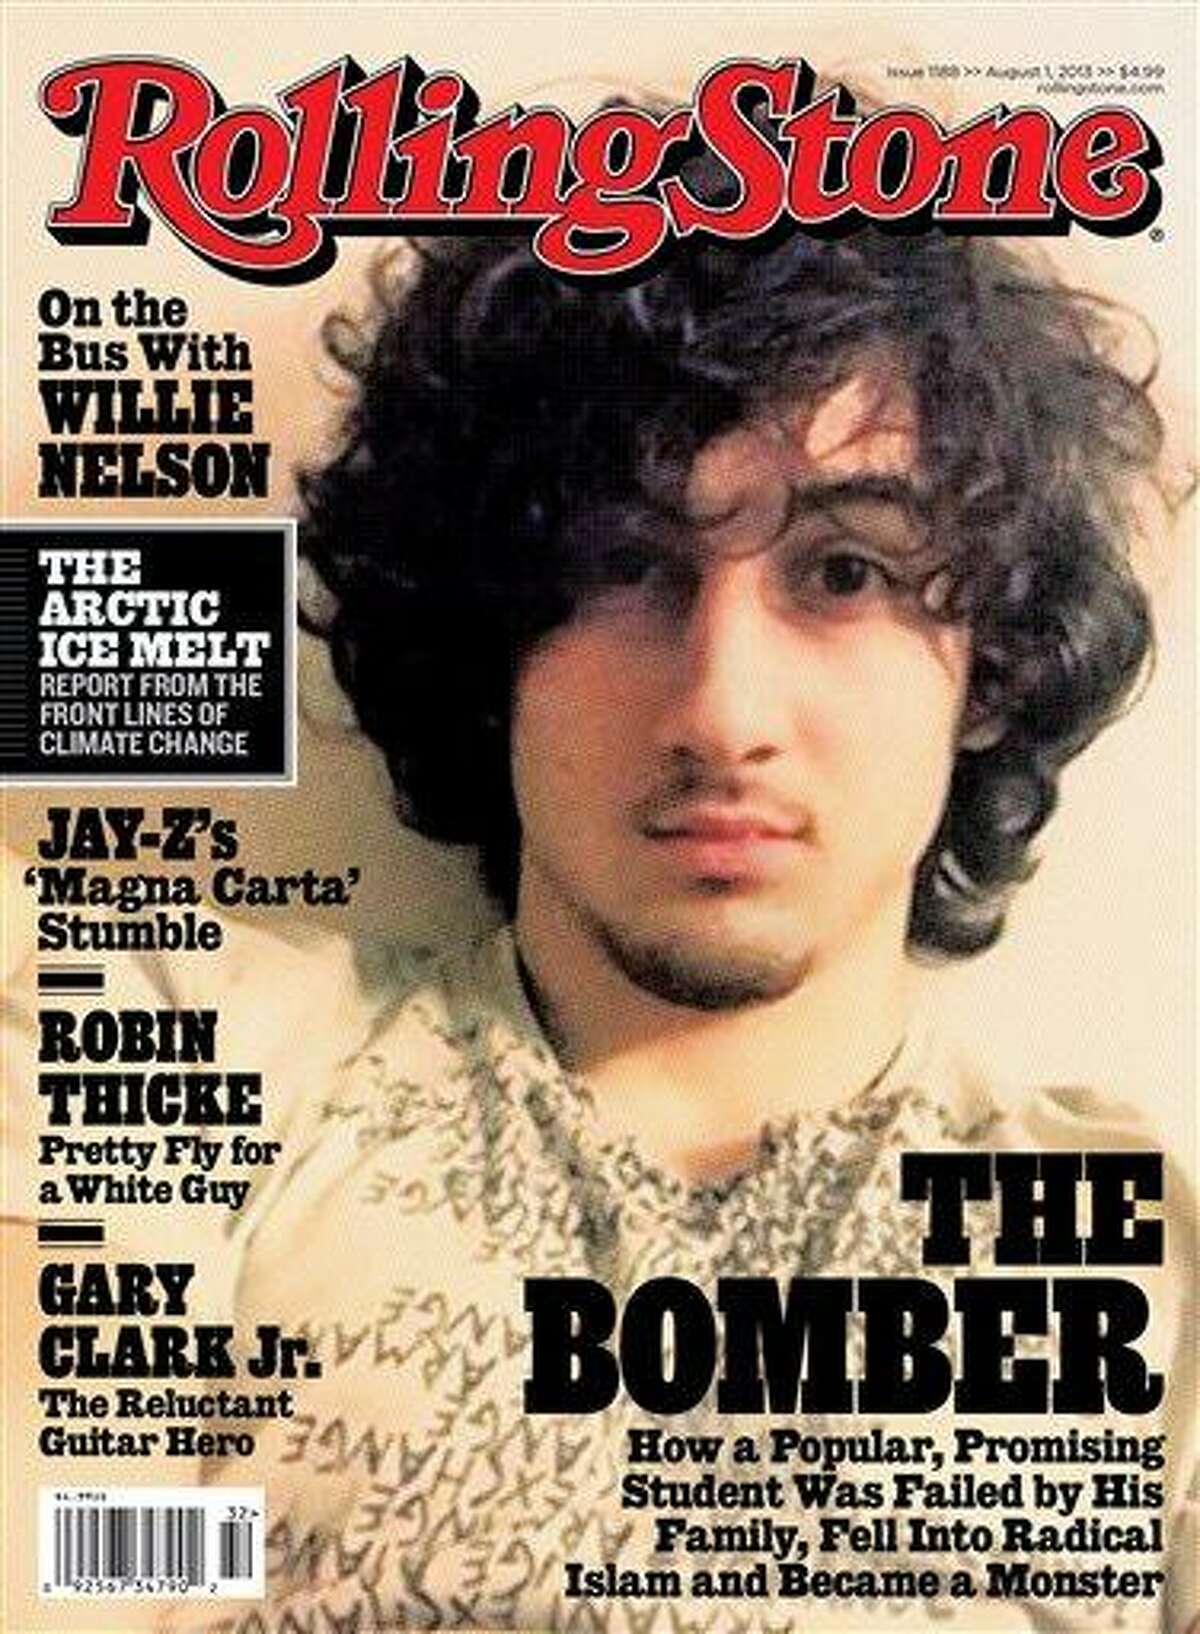 In this magazine cover image released by Wenner Media, Boston Marathon bombing suspect Dzhokhar Tsarnaev appears on the cover of the Aug. 1, 2013 issue of "Rolling Stone." (AP Photo/Wenner Media)